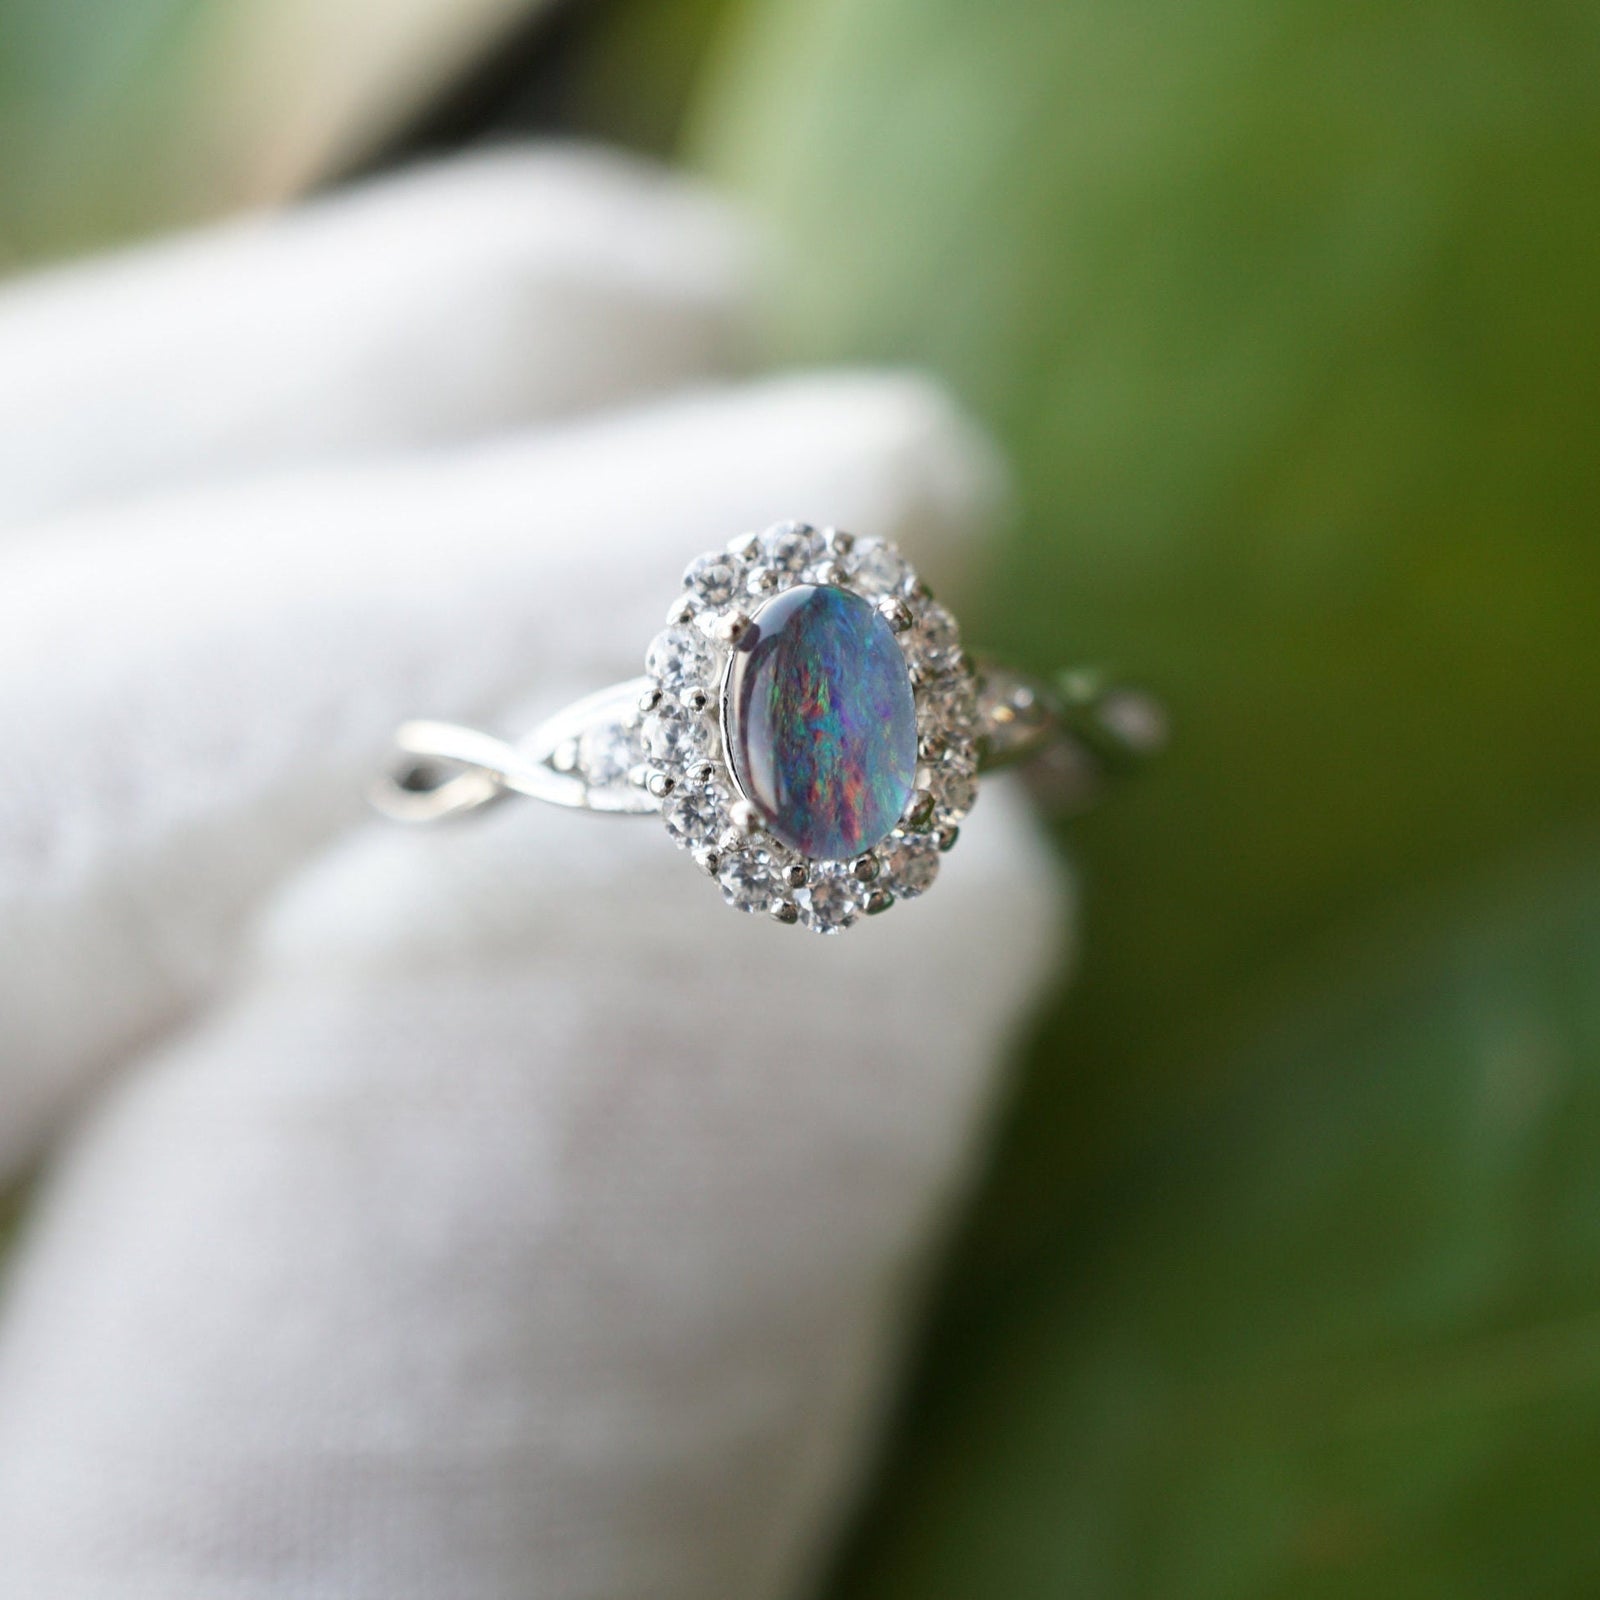 Stunning halo silver australian opal ring | australian opal triplet ring | real opal ring | natural opal ring | gift for her | opal jewelry-Vsabel Jewellery